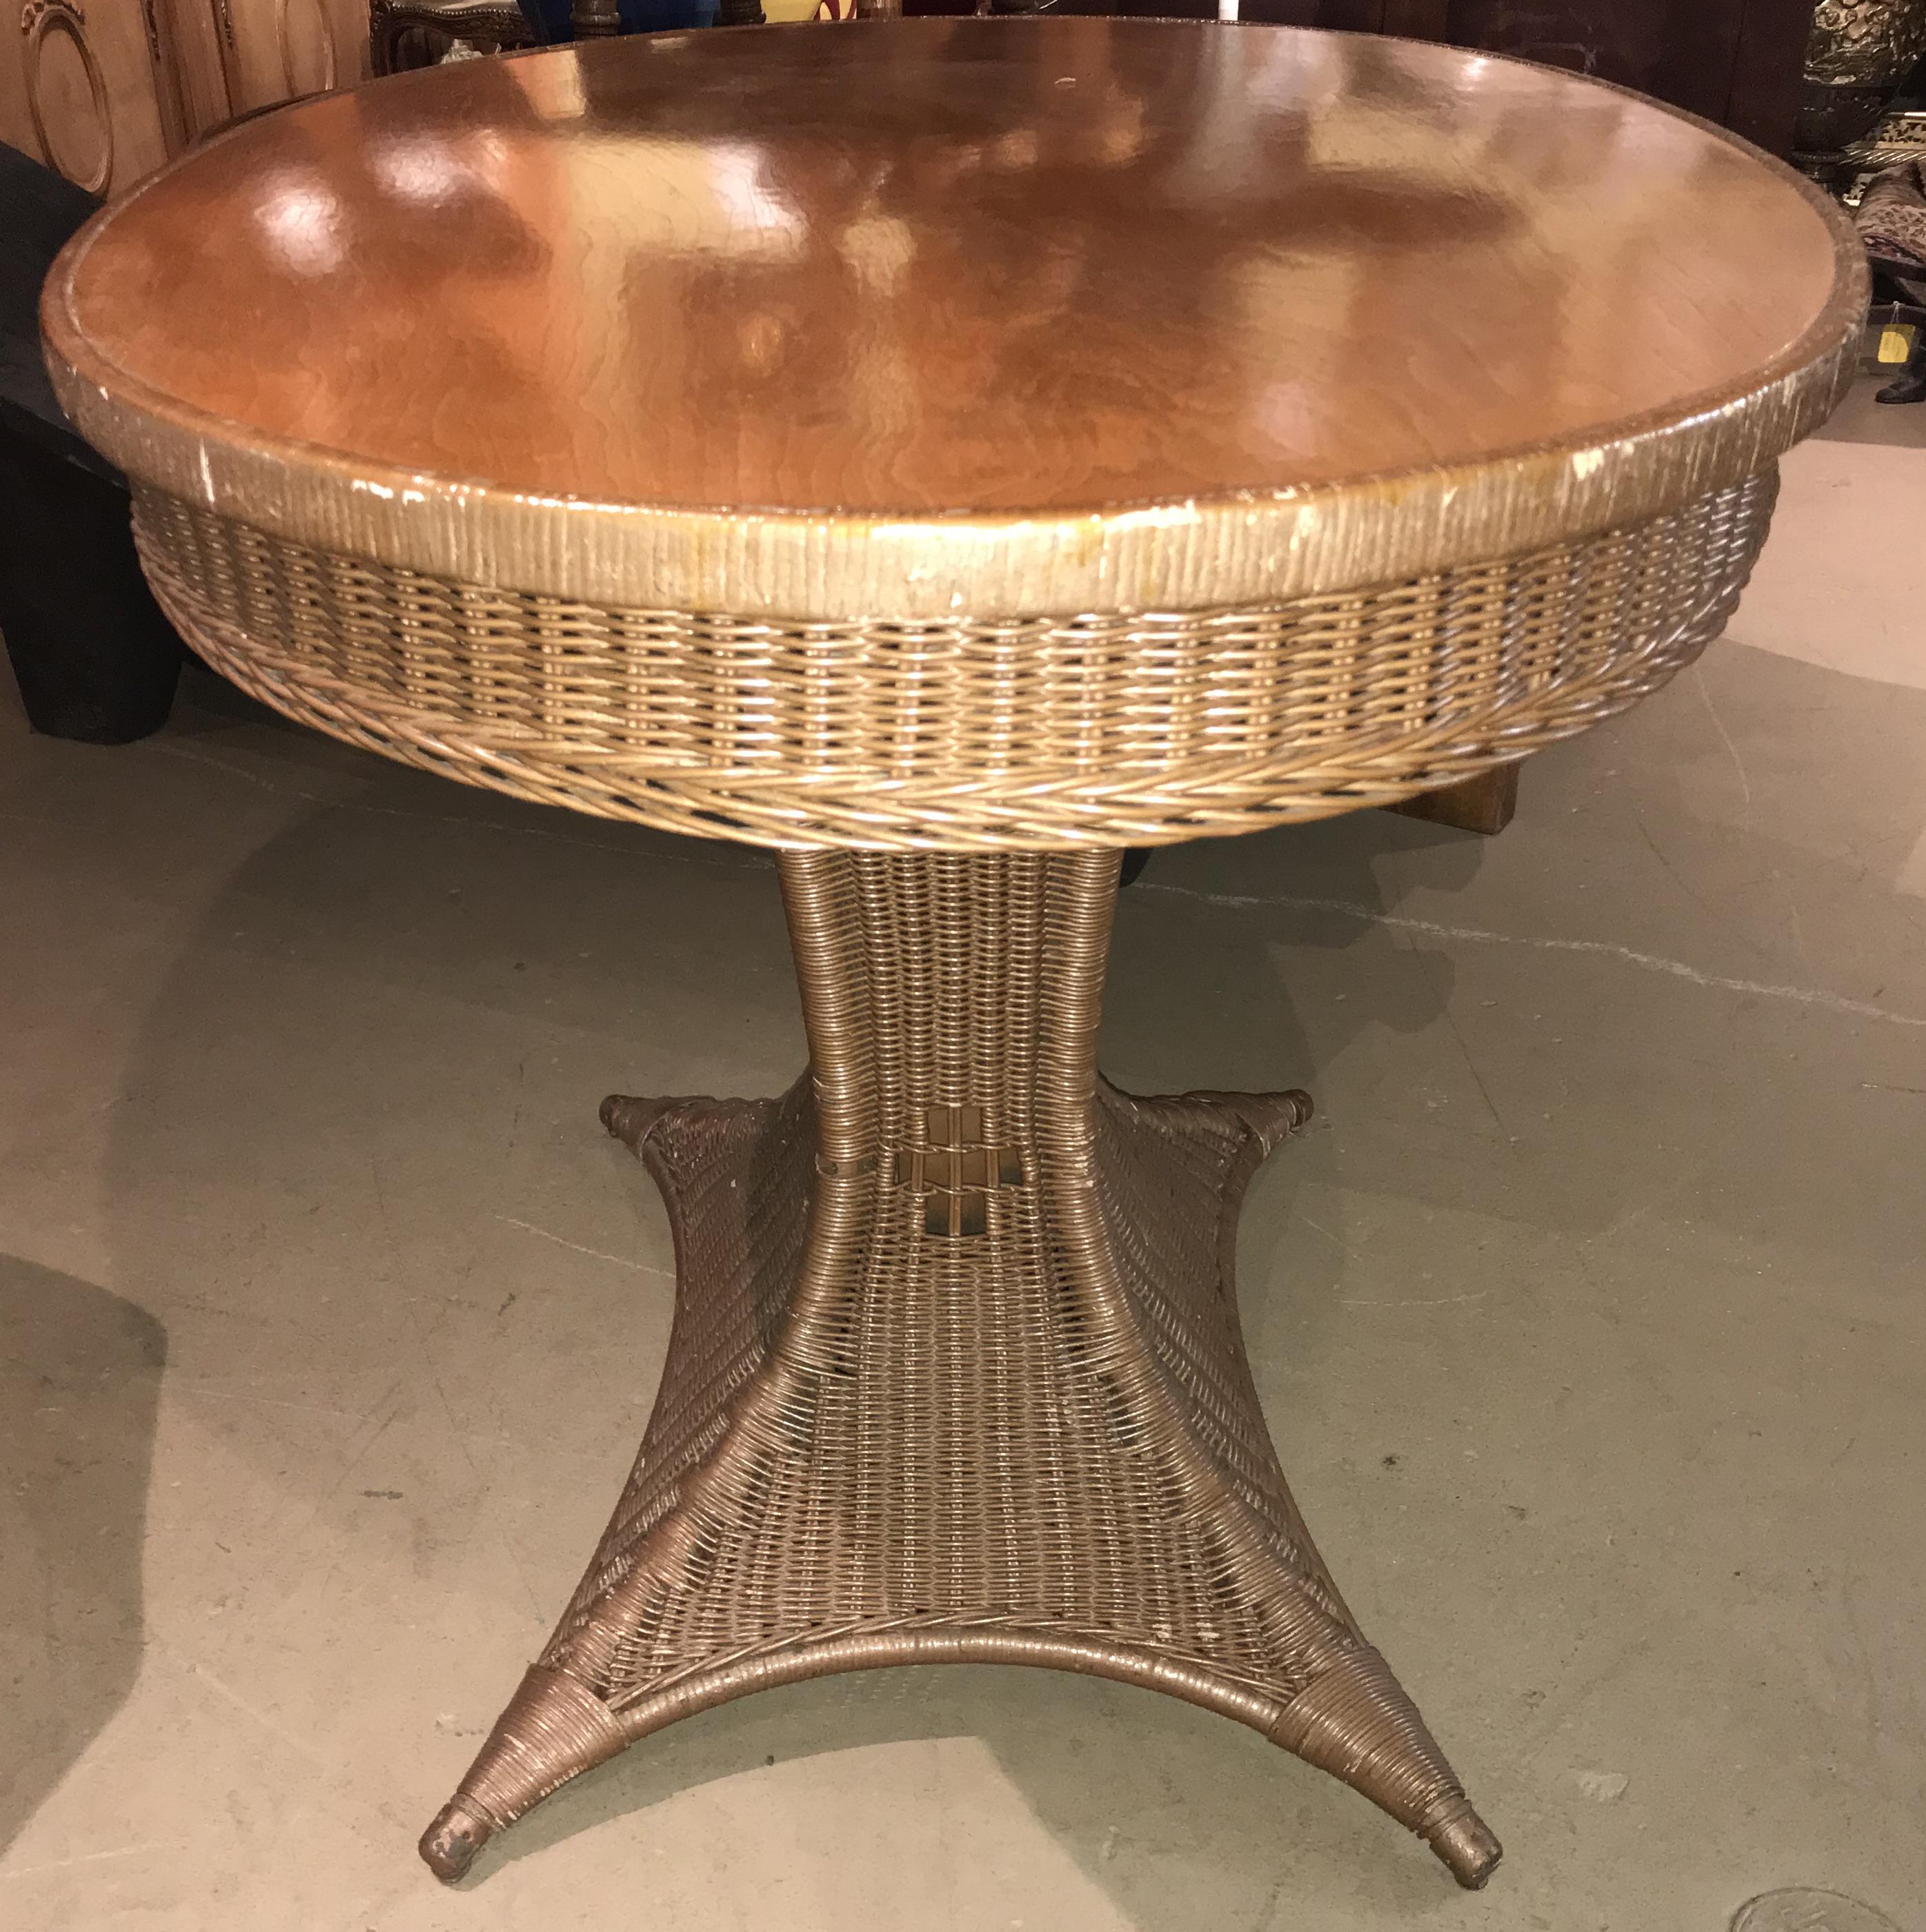 Early 20th Century Paine Furniture Company Oval Wicker Pedestal Center Table 1